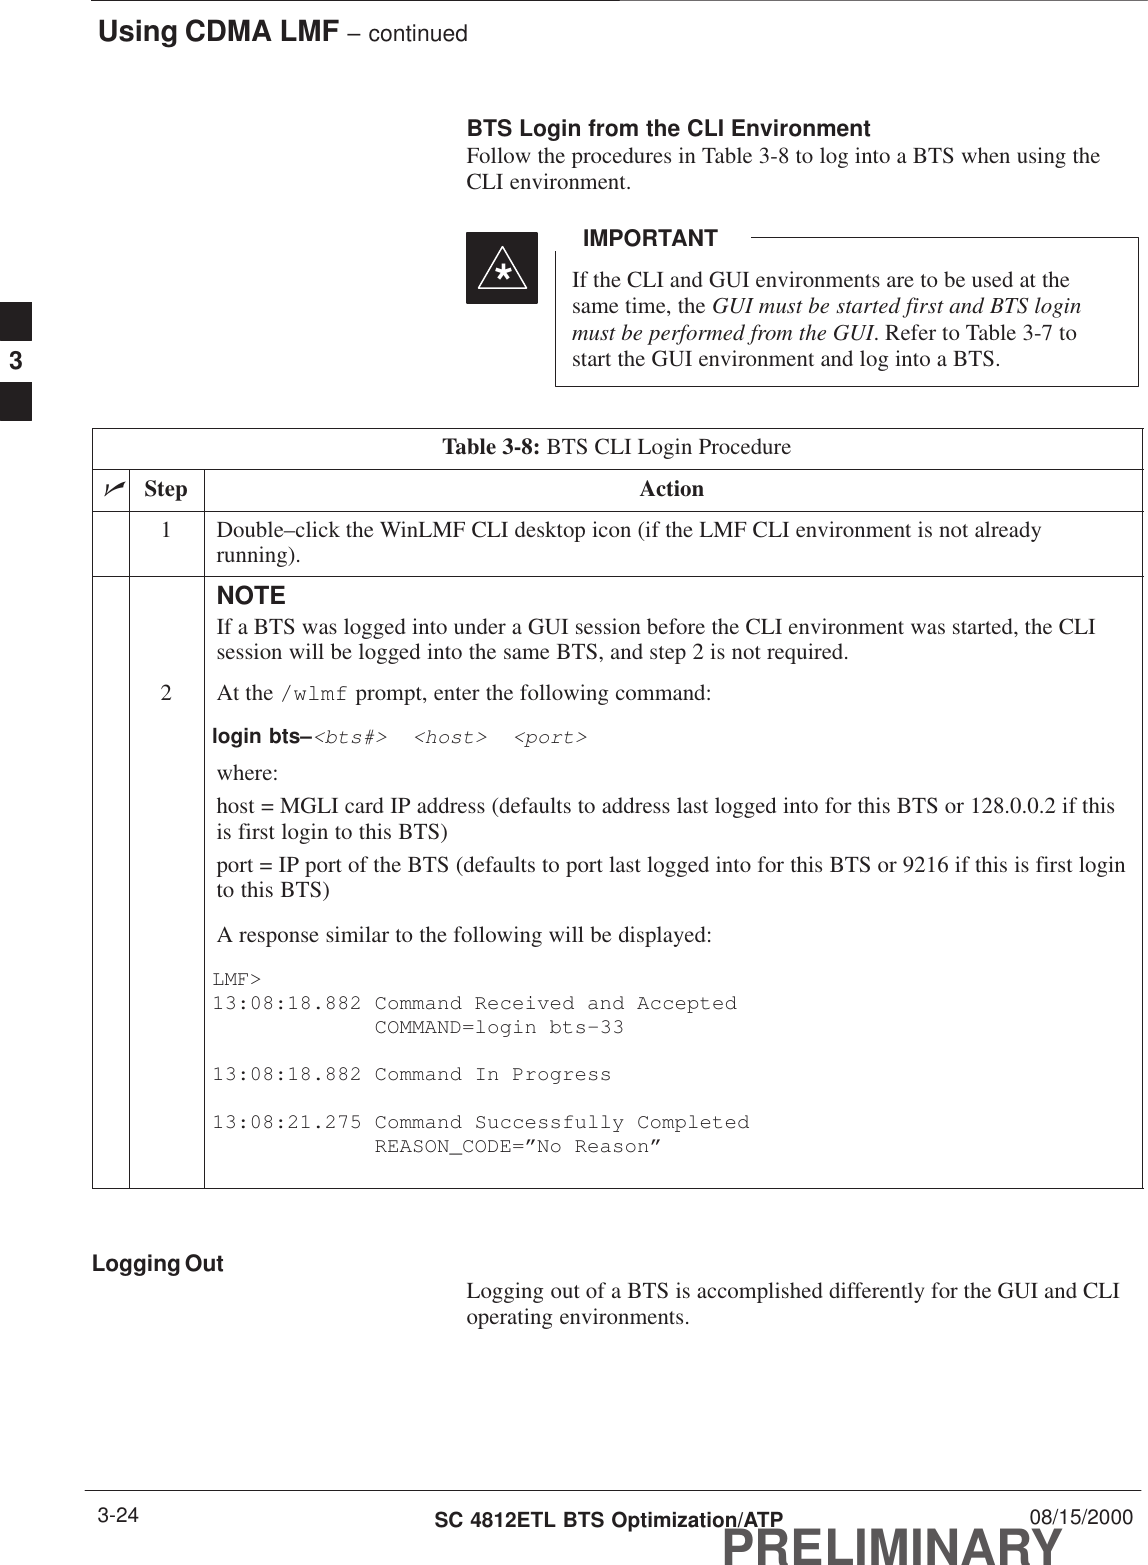 Using CDMA LMF – continuedPRELIMINARYSC 4812ETL BTS Optimization/ATP 08/15/20003-24BTS Login from the CLI EnvironmentFollow the procedures in Table 3-8 to log into a BTS when using theCLI environment.If the CLI and GUI environments are to be used at thesame time, the GUI must be started first and BTS loginmust be performed from the GUI. Refer to Table 3-7 tostart the GUI environment and log into a BTS.IMPORTANT*Table 3-8: BTS CLI Login ProcedurenStep Action1Double–click the WinLMF CLI desktop icon (if the LMF CLI environment is not alreadyrunning).NOTEIf a BTS was logged into under a GUI session before the CLI environment was started, the CLIsession will be logged into the same BTS, and step 2 is not required.2At the /wlmf prompt, enter the following command:login bts–&lt;bts#&gt;  &lt;host&gt;  &lt;port&gt;where:host = MGLI card IP address (defaults to address last logged into for this BTS or 128.0.0.2 if thisis first login to this BTS)port = IP port of the BTS (defaults to port last logged into for this BTS or 9216 if this is first loginto this BTS)A response similar to the following will be displayed:LMF&gt;13:08:18.882 Command Received and Accepted             COMMAND=login bts–3313:08:18.882 Command In Progress13:08:21.275 Command Successfully Completed             REASON_CODE=”No Reason” Logging Out Logging out of a BTS is accomplished differently for the GUI and CLIoperating environments.3